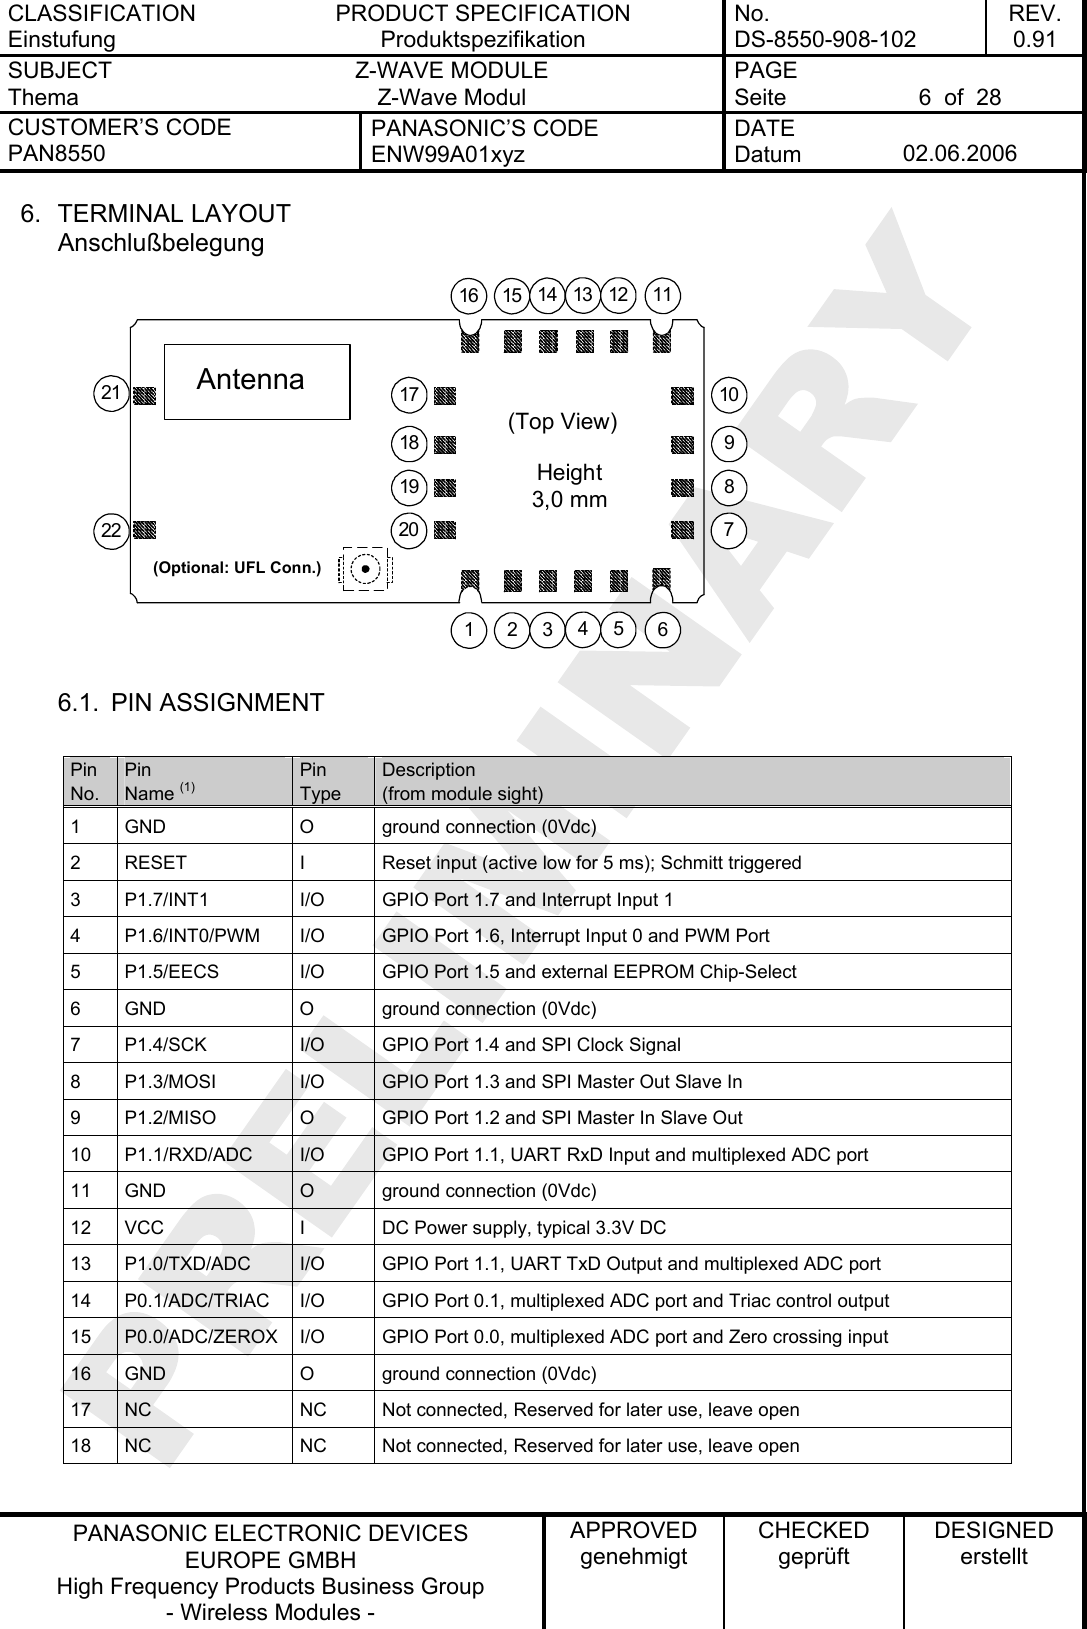 CLASSIFICATION Einstufung PRODUCT SPECIFICATION Produktspezifikation No. DS-8550-908-102 REV. 0.91 SUBJECT Thema Z-WAVE MODULE Z-Wave Modul PAGE Seite  6  of  28 CUSTOMER’S CODE PAN8550 PANASONIC’S CODE ENW99A01xyz DATE Datum  02.06.2006   PANASONIC ELECTRONIC DEVICES EUROPE GMBH High Frequency Products Business Group - Wireless Modules - APPROVED genehmigt CHECKED geprüft DESIGNED erstellt 6. TERMINAL LAYOUT Anschlußbelegung (Top View)Height3,0 mmAntenna21 34 5 61516 14 13 12 117891020191817(Optional: UFL Conn.)2122 6.1. PIN ASSIGNMENT  Pin No. Pin Name (1) Pin Type Description (from module sight)  1  GND  O  ground connection (0Vdc) 2  RESET  I  Reset input (active low for 5 ms); Schmitt triggered 3  P1.7/INT1  I/O  GPIO Port 1.7 and Interrupt Input 1 4  P1.6/INT0/PWM  I/O  GPIO Port 1.6, Interrupt Input 0 and PWM Port 5  P1.5/EECS  I/O  GPIO Port 1.5 and external EEPROM Chip-Select 6  GND  O  ground connection (0Vdc) 7  P1.4/SCK  I/O  GPIO Port 1.4 and SPI Clock Signal 8  P1.3/MOSI  I/O  GPIO Port 1.3 and SPI Master Out Slave In 9  P1.2/MISO  O  GPIO Port 1.2 and SPI Master In Slave Out 10  P1.1/RXD/ADC  I/O  GPIO Port 1.1, UART RxD Input and multiplexed ADC port 11  GND  O  ground connection (0Vdc) 12  VCC  I  DC Power supply, typical 3.3V DC 13  P1.0/TXD/ADC  I/O  GPIO Port 1.1, UART TxD Output and multiplexed ADC port 14  P0.1/ADC/TRIAC  I/O  GPIO Port 0.1, multiplexed ADC port and Triac control output 15  P0.0/ADC/ZEROX  I/O  GPIO Port 0.0, multiplexed ADC port and Zero crossing input 16  GND  O  ground connection (0Vdc) 17  NC  NC  Not connected, Reserved for later use, leave open 18  NC  NC  Not connected, Reserved for later use, leave open  